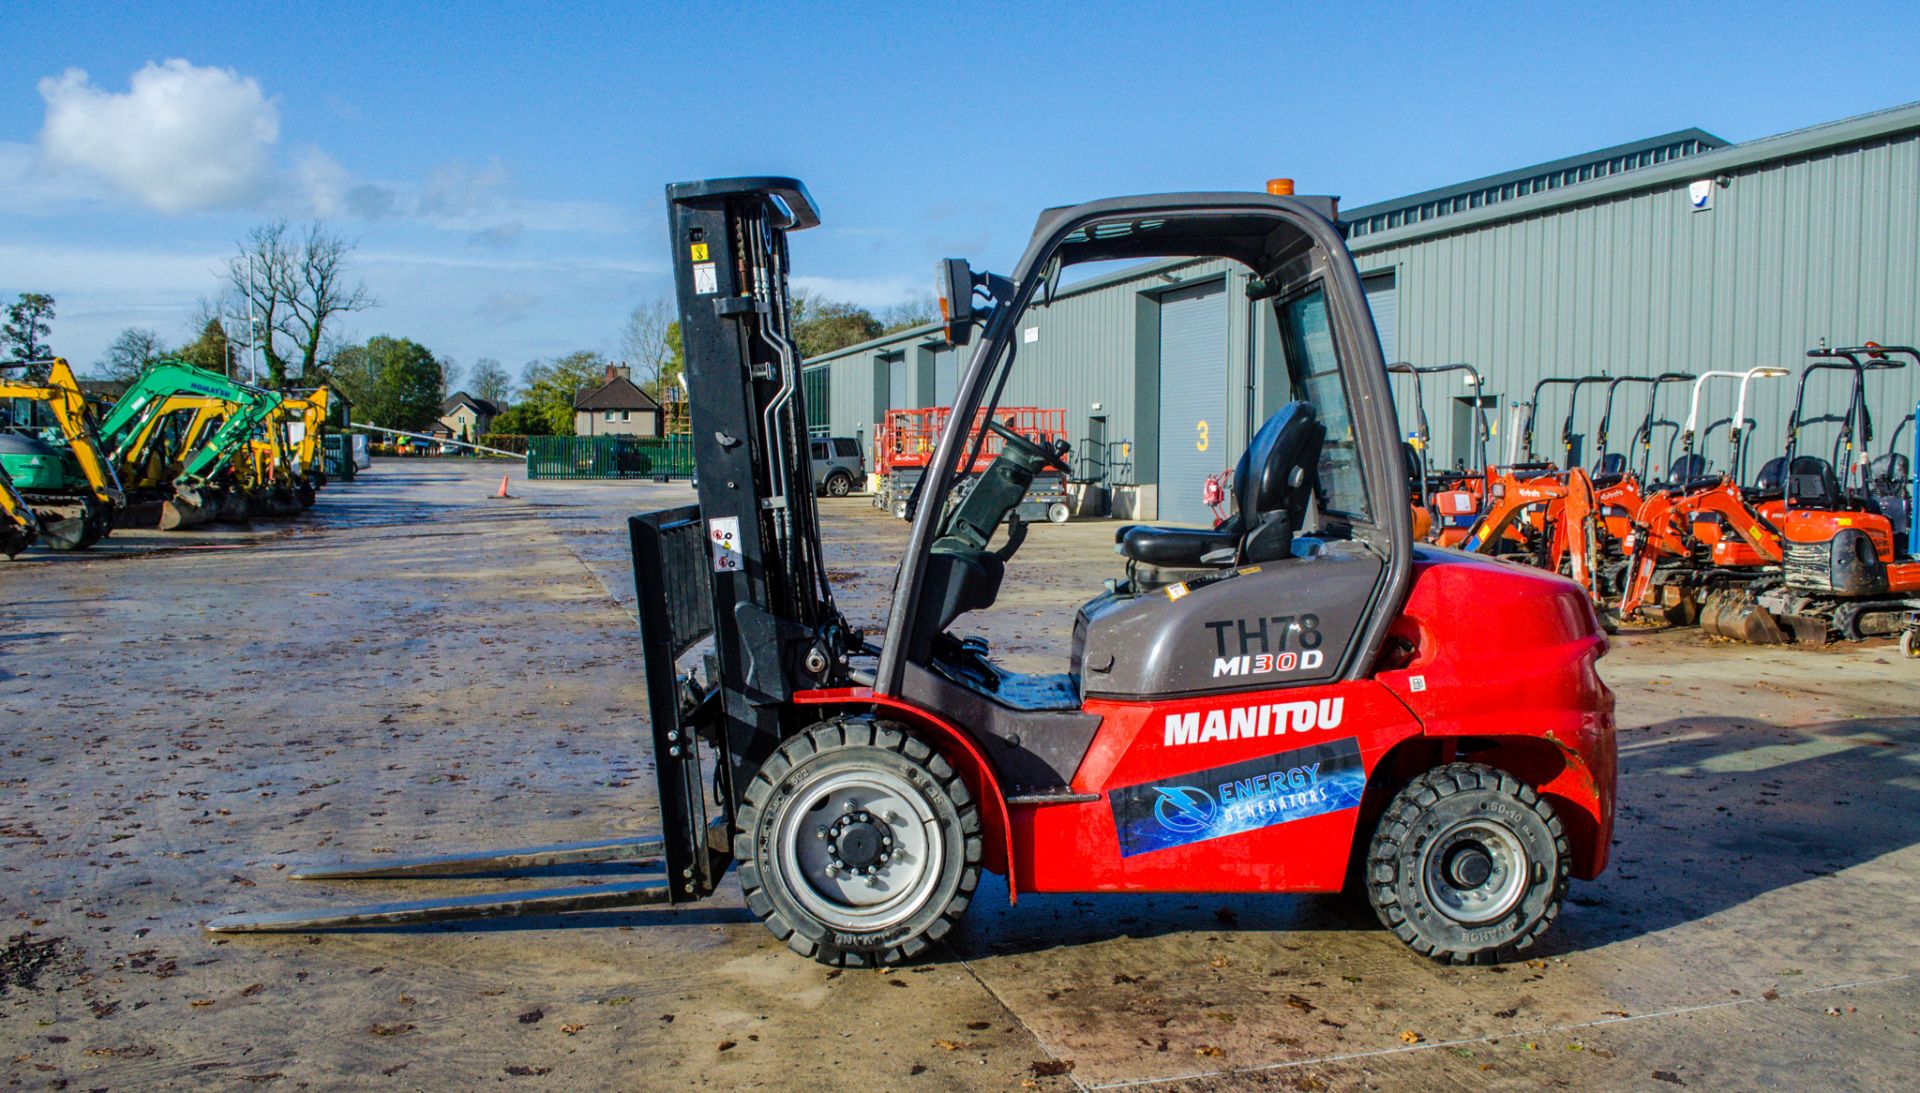 Manitou MI30D 3 tonne diesel driven forklift trucks Year: 2020 S/N: 0087737 Recorded Hours: 248 - Image 6 of 17